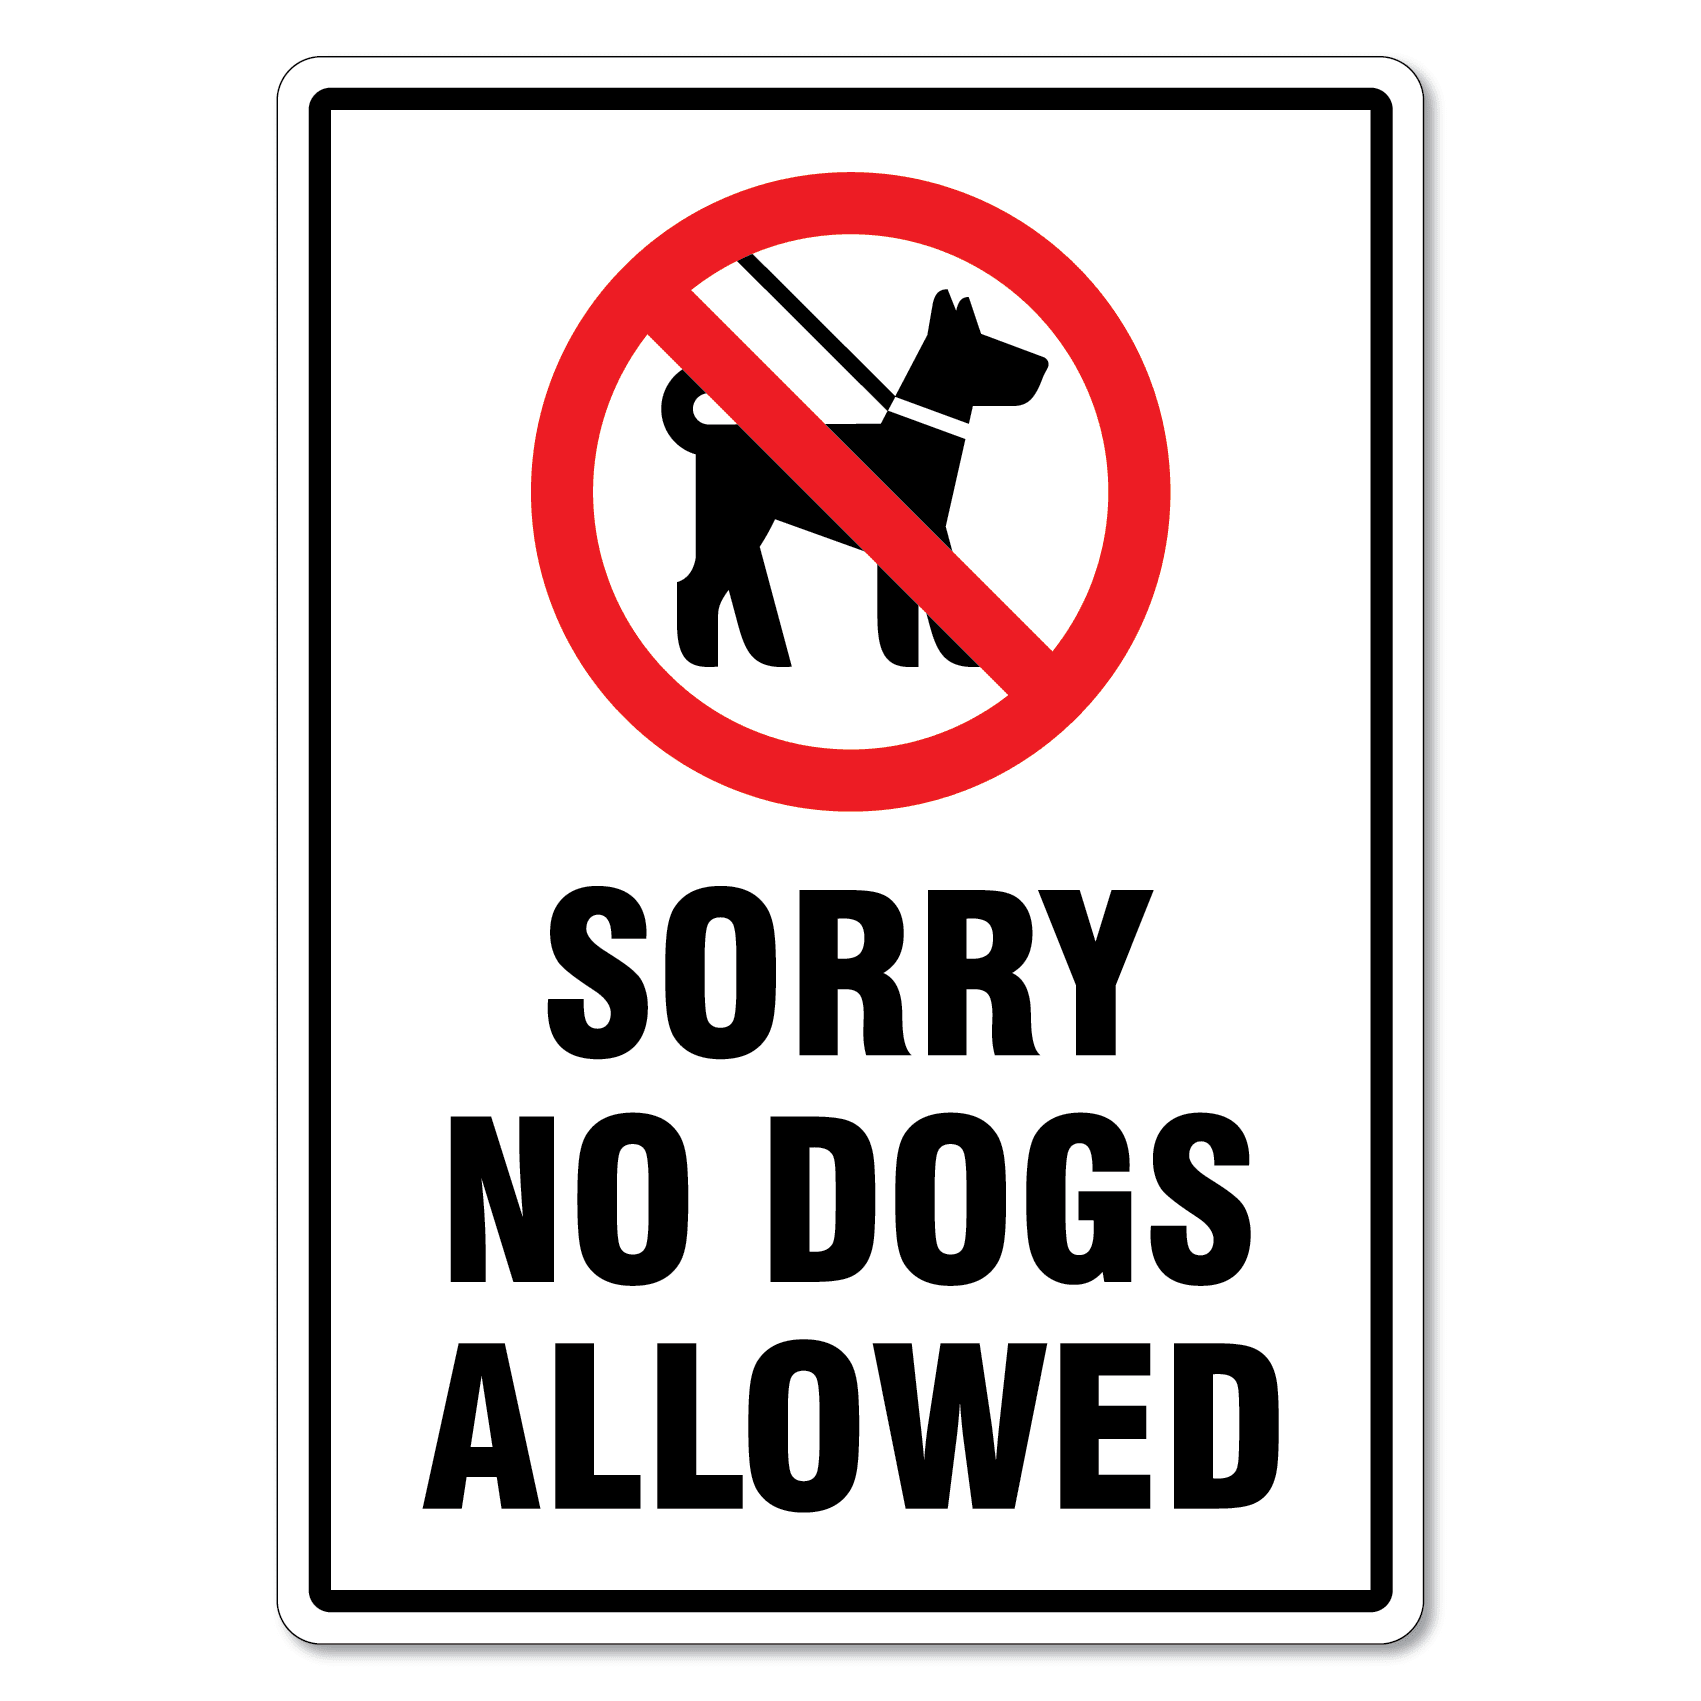 Additional property is not allowed. No Dogs allowed. No Dogs allowed sign. Ноу сори. Pets are not allowed.